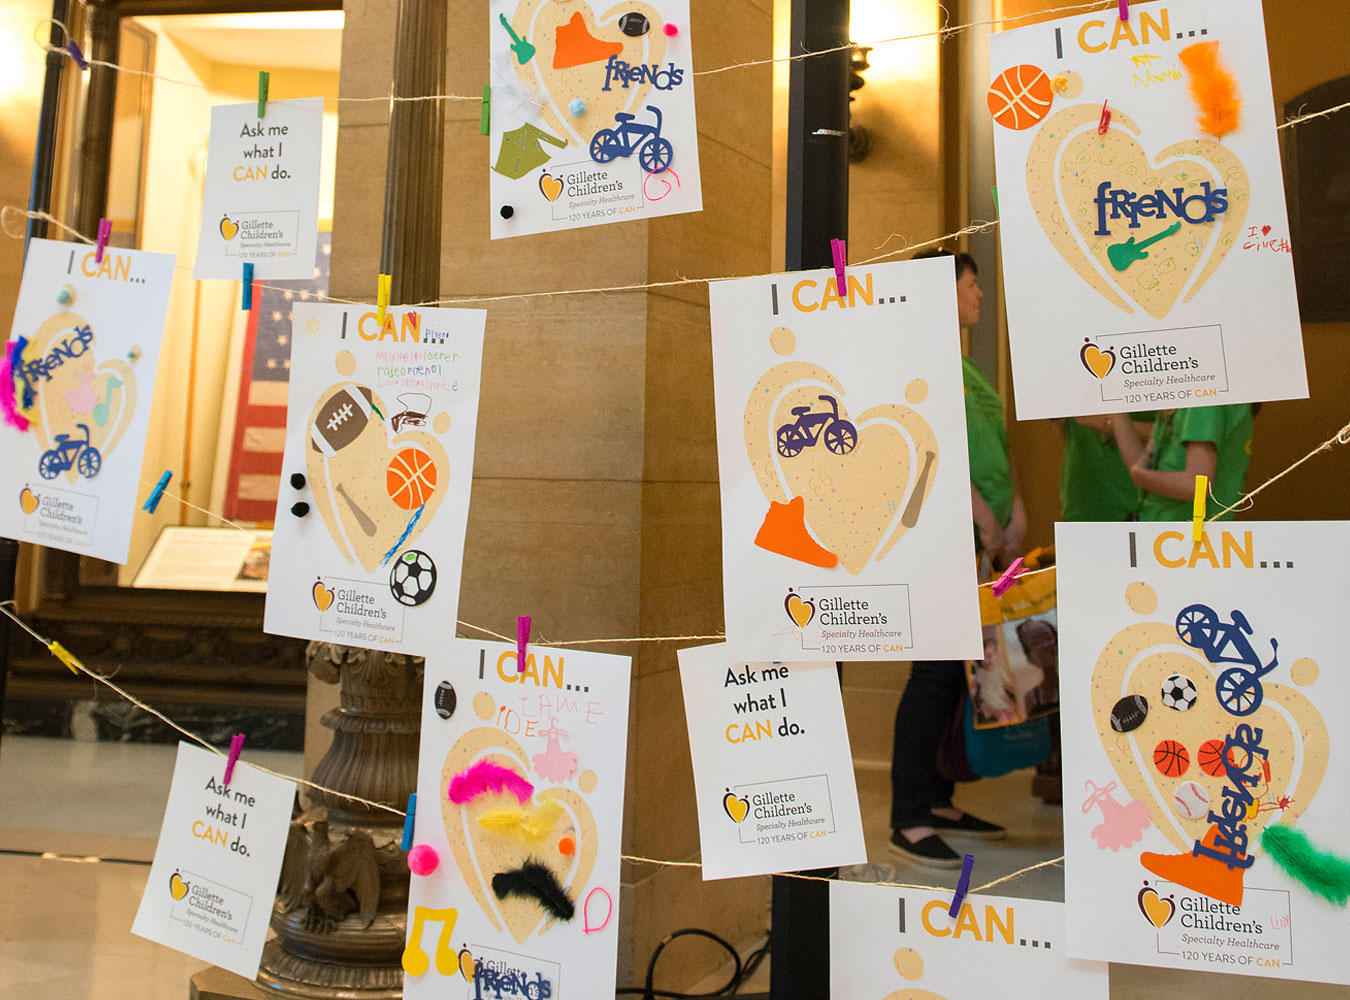 Artwork from gillette patients at Capitol Day